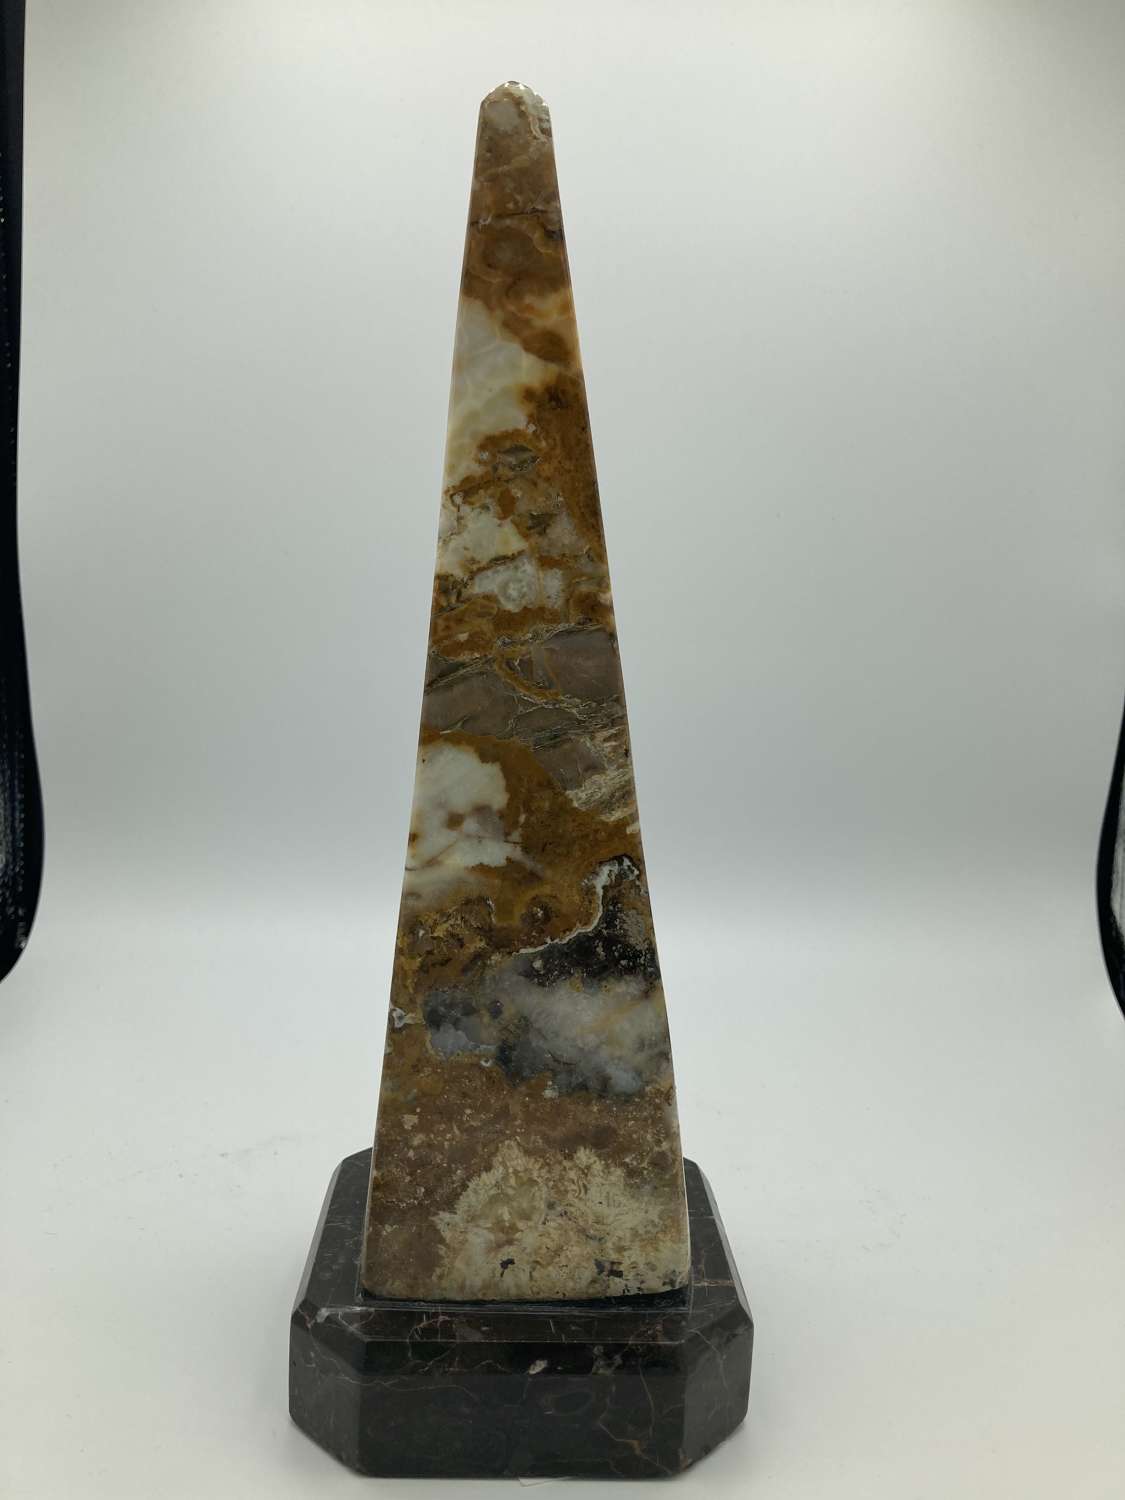 A Quirky Marble Obelisk